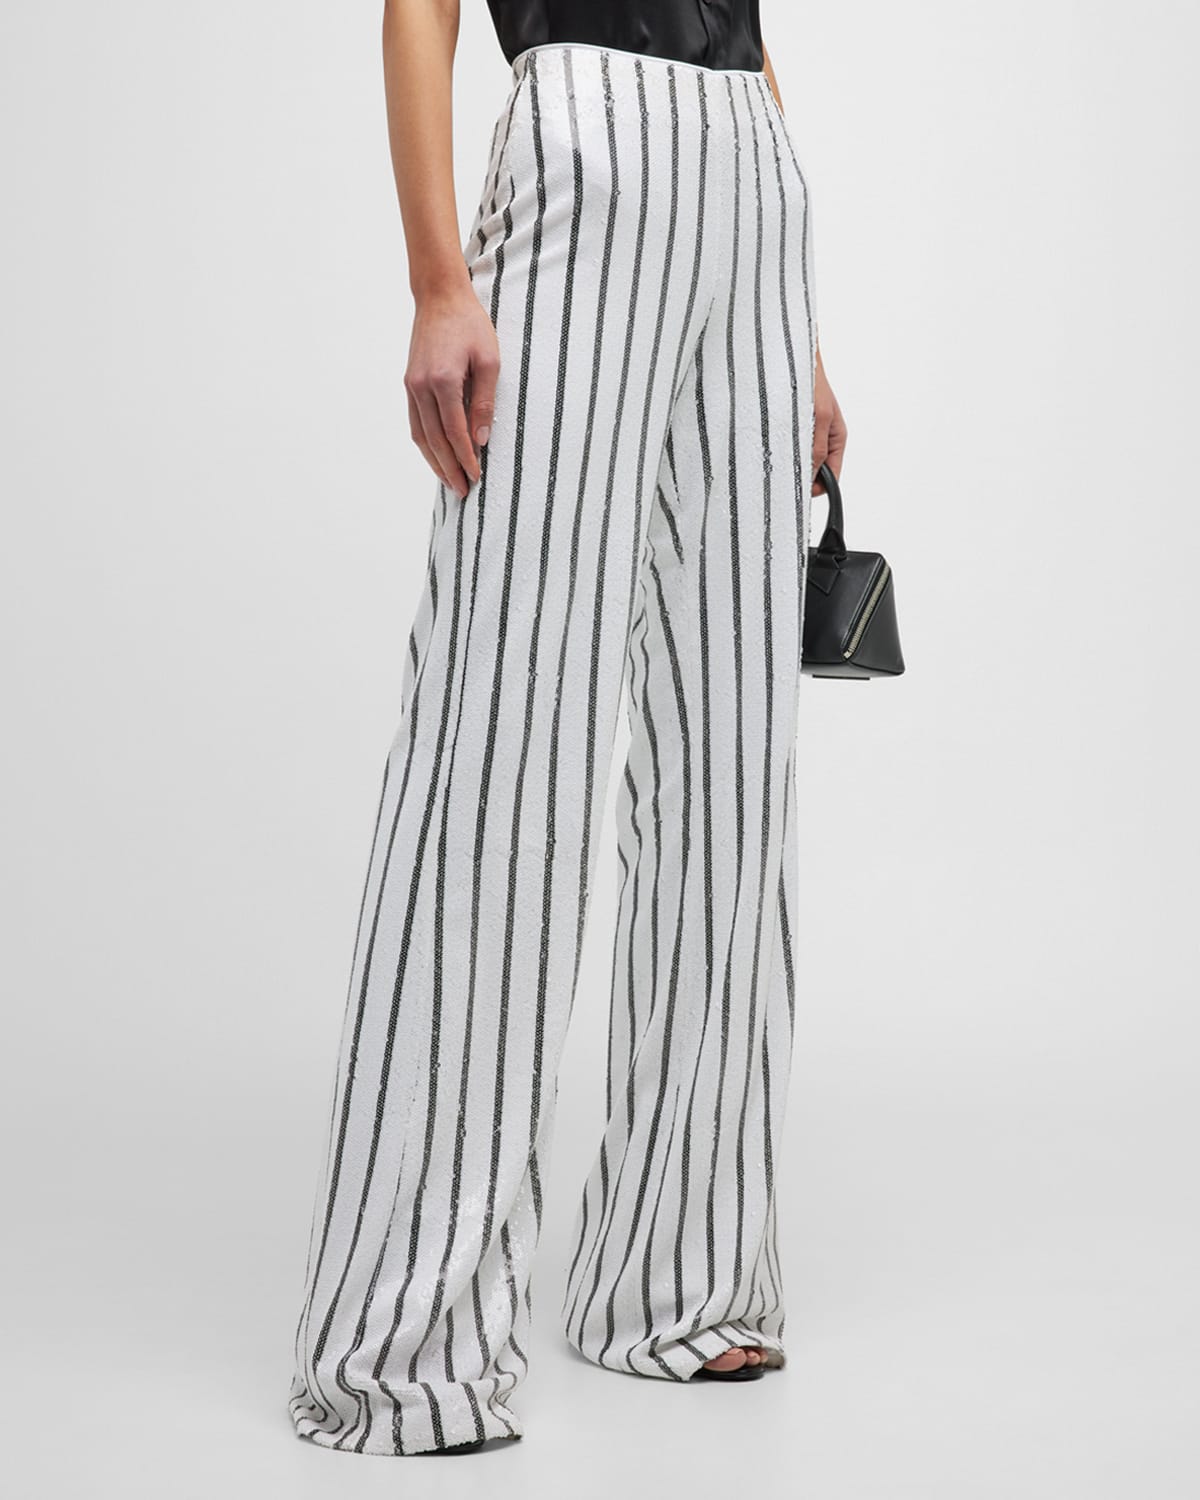 L AGENCE SAPPHIRE SEQUINED STRIPED PANTS